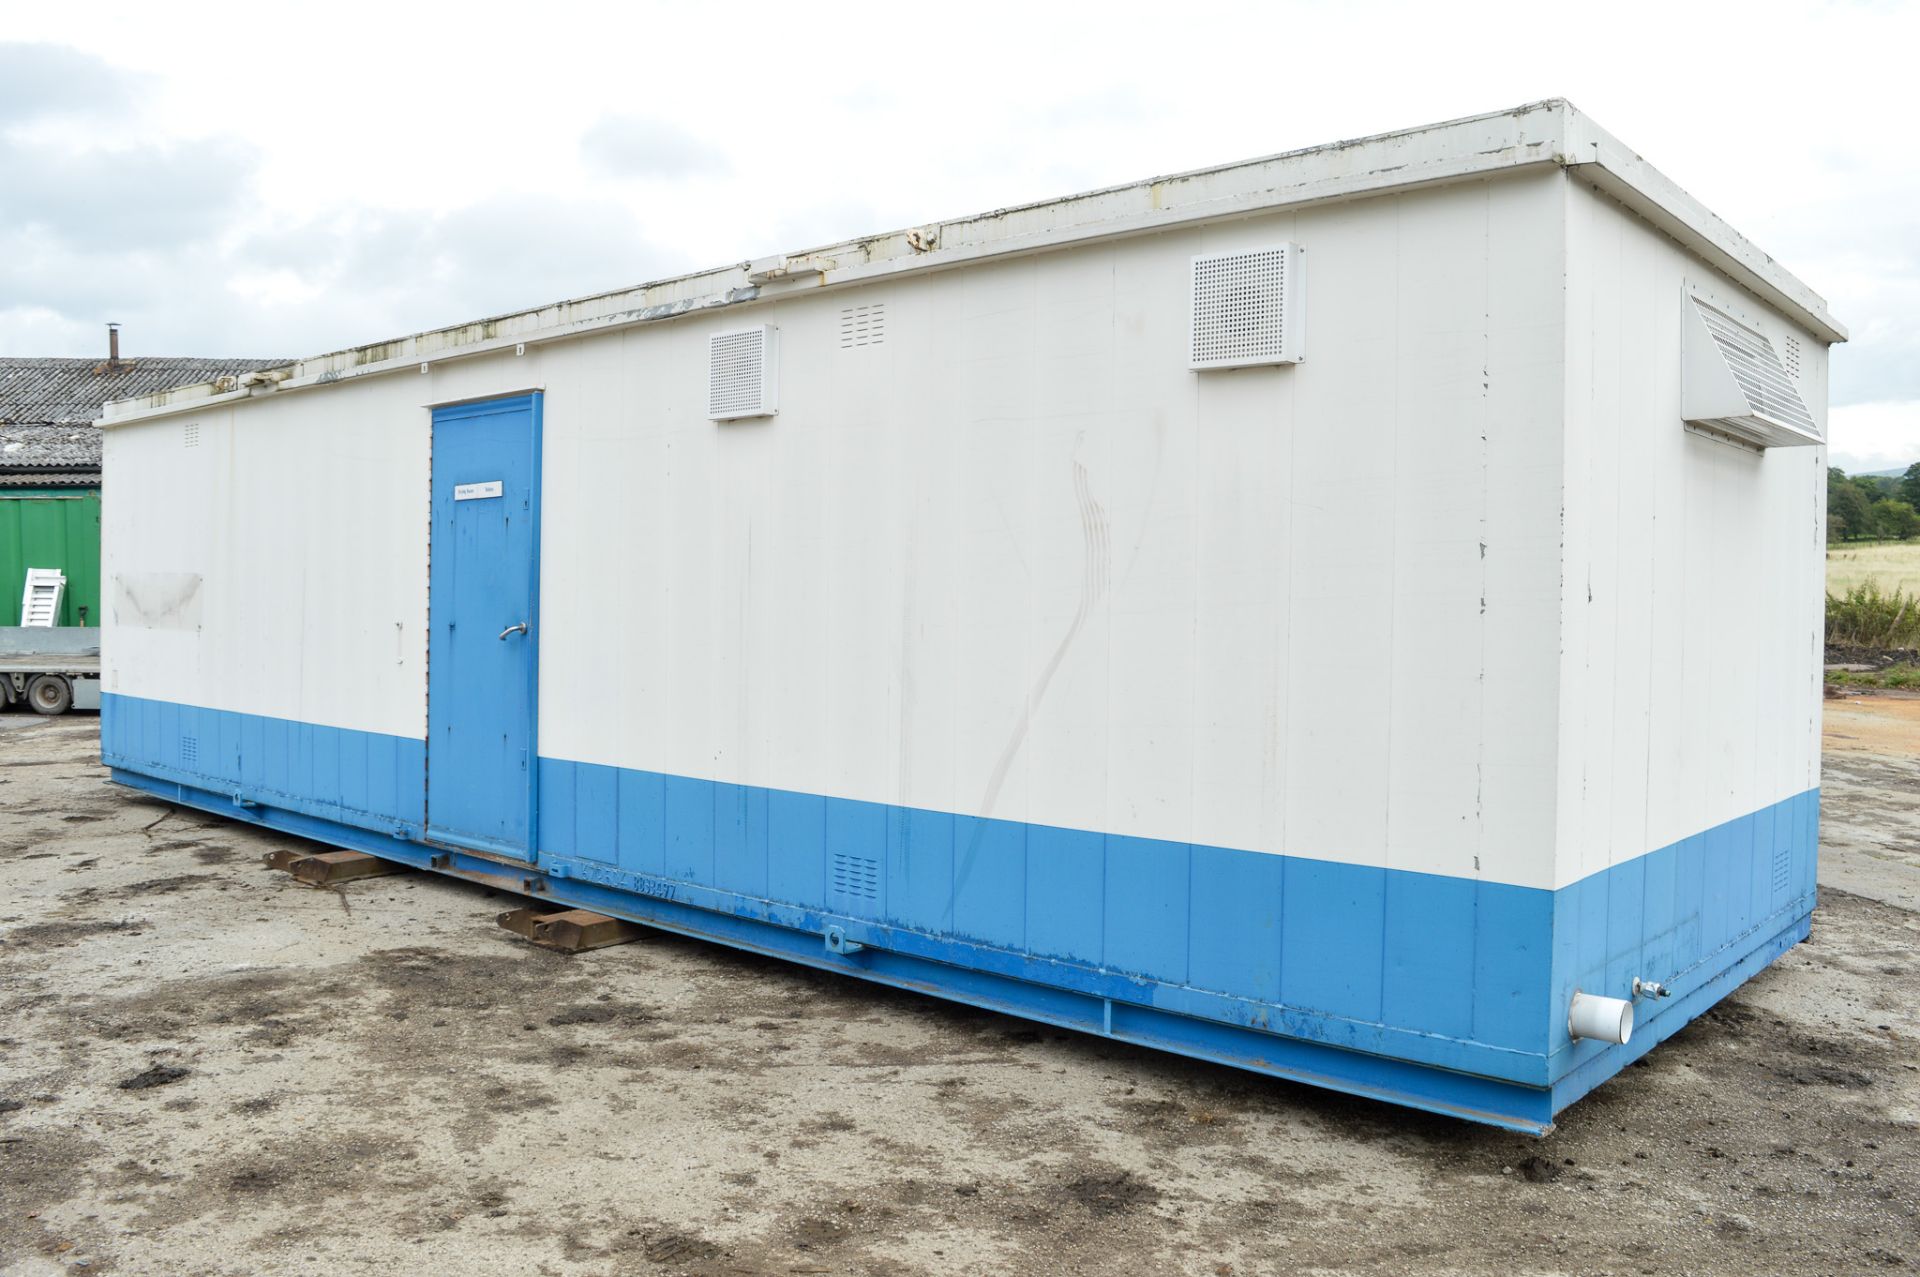 32 ft x 9 ft anti vandal steel toilet & drying room site unit comprising of drying room, gents &